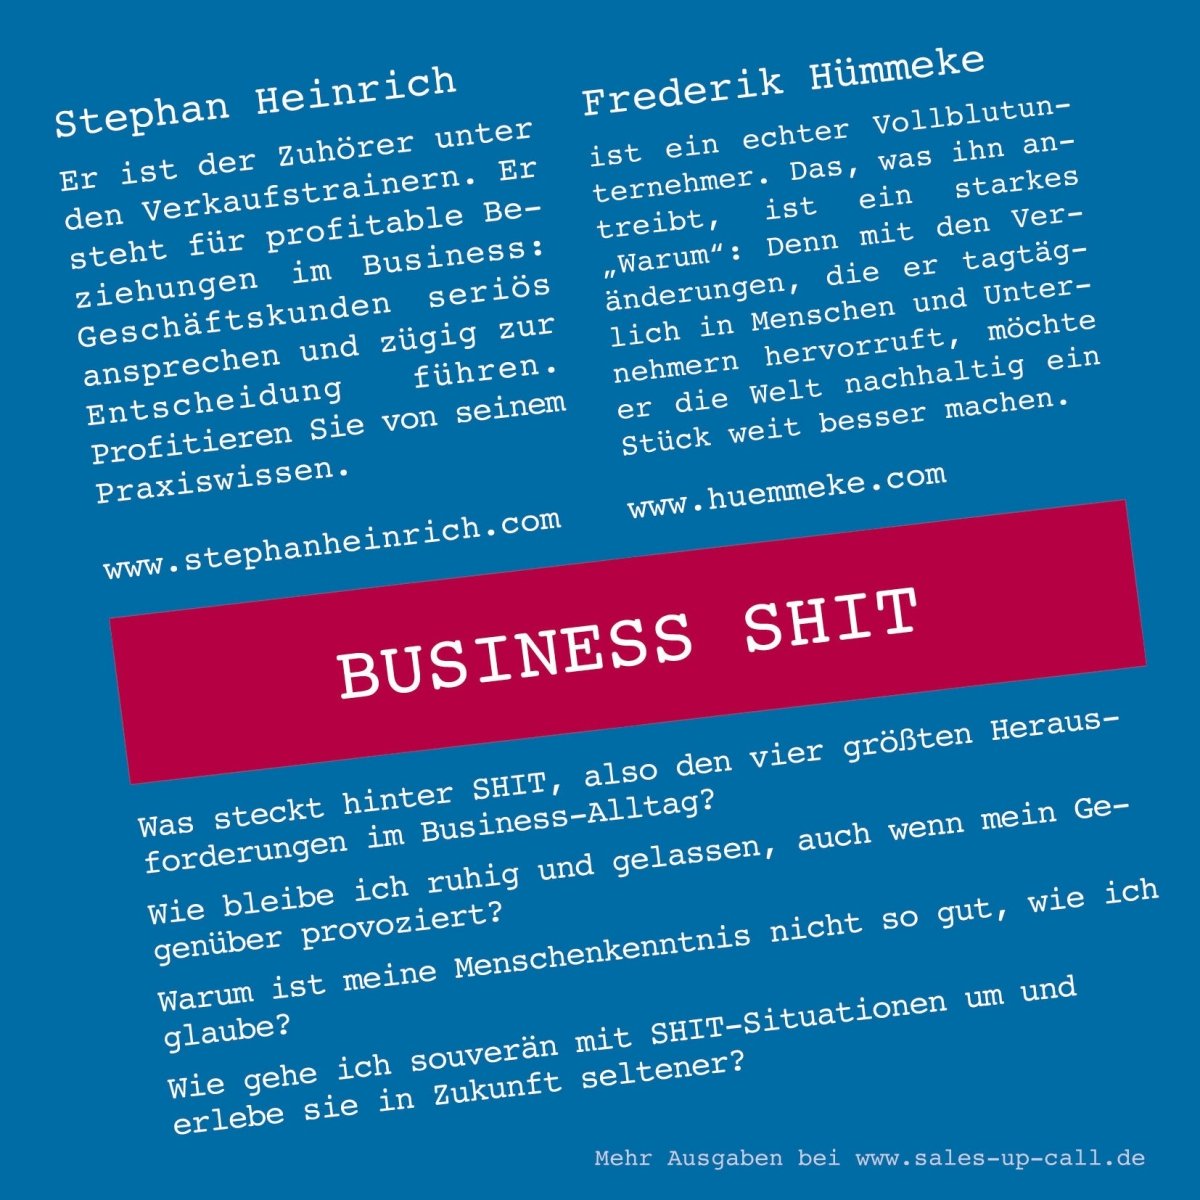 Business SHIT - Sales-up-Call - Stephan Heinrich